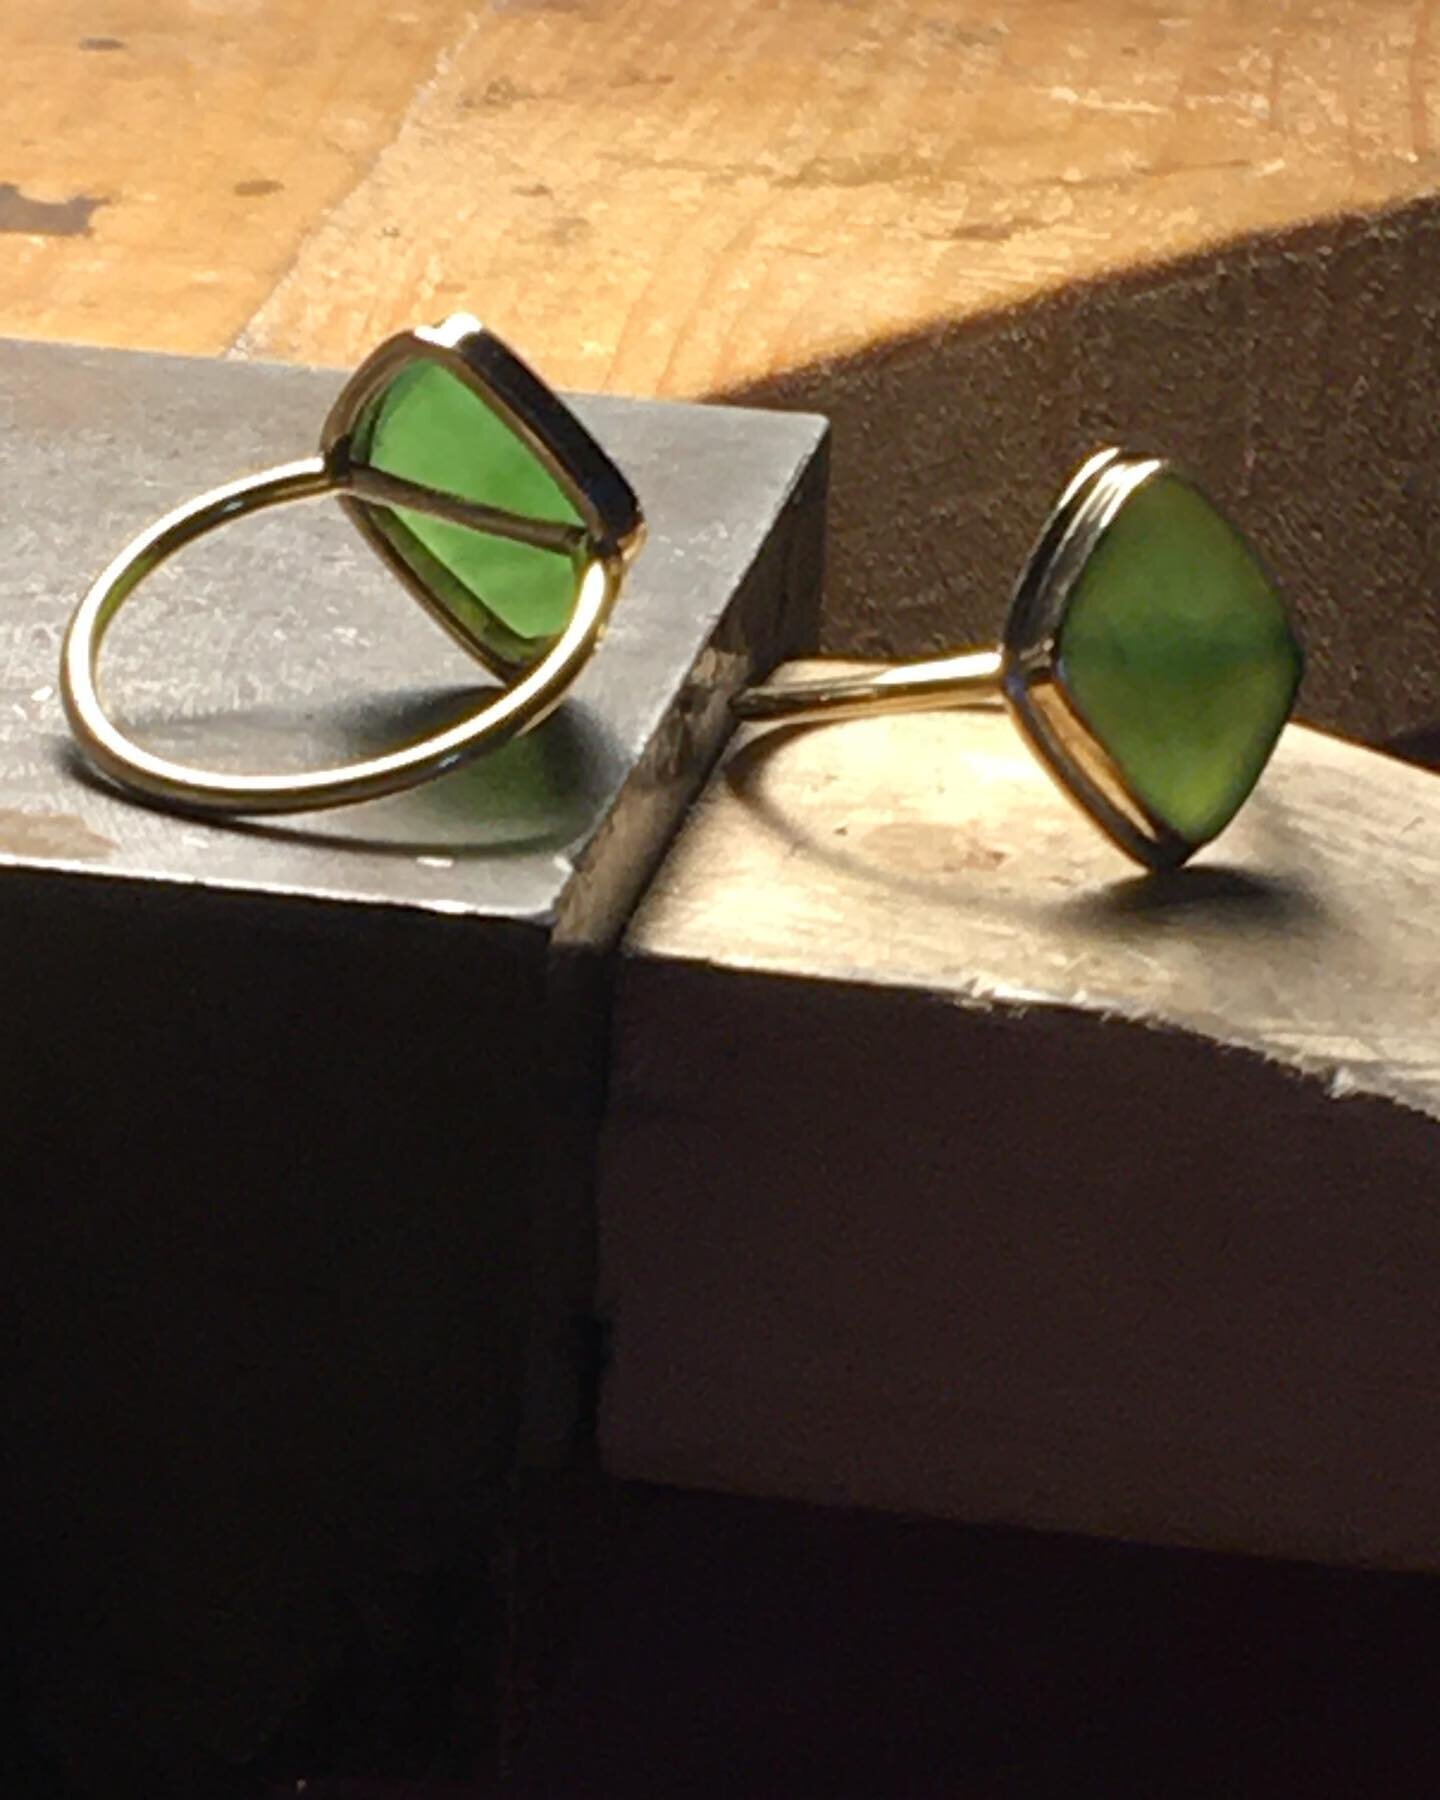 I really enjoyed working on this commission, transforming gold and jade cufflinks that belonged to my clients father in to rings for her and her sister. Drop me a line if you have a beloved treasure that you would like me to make in to a wearable pie